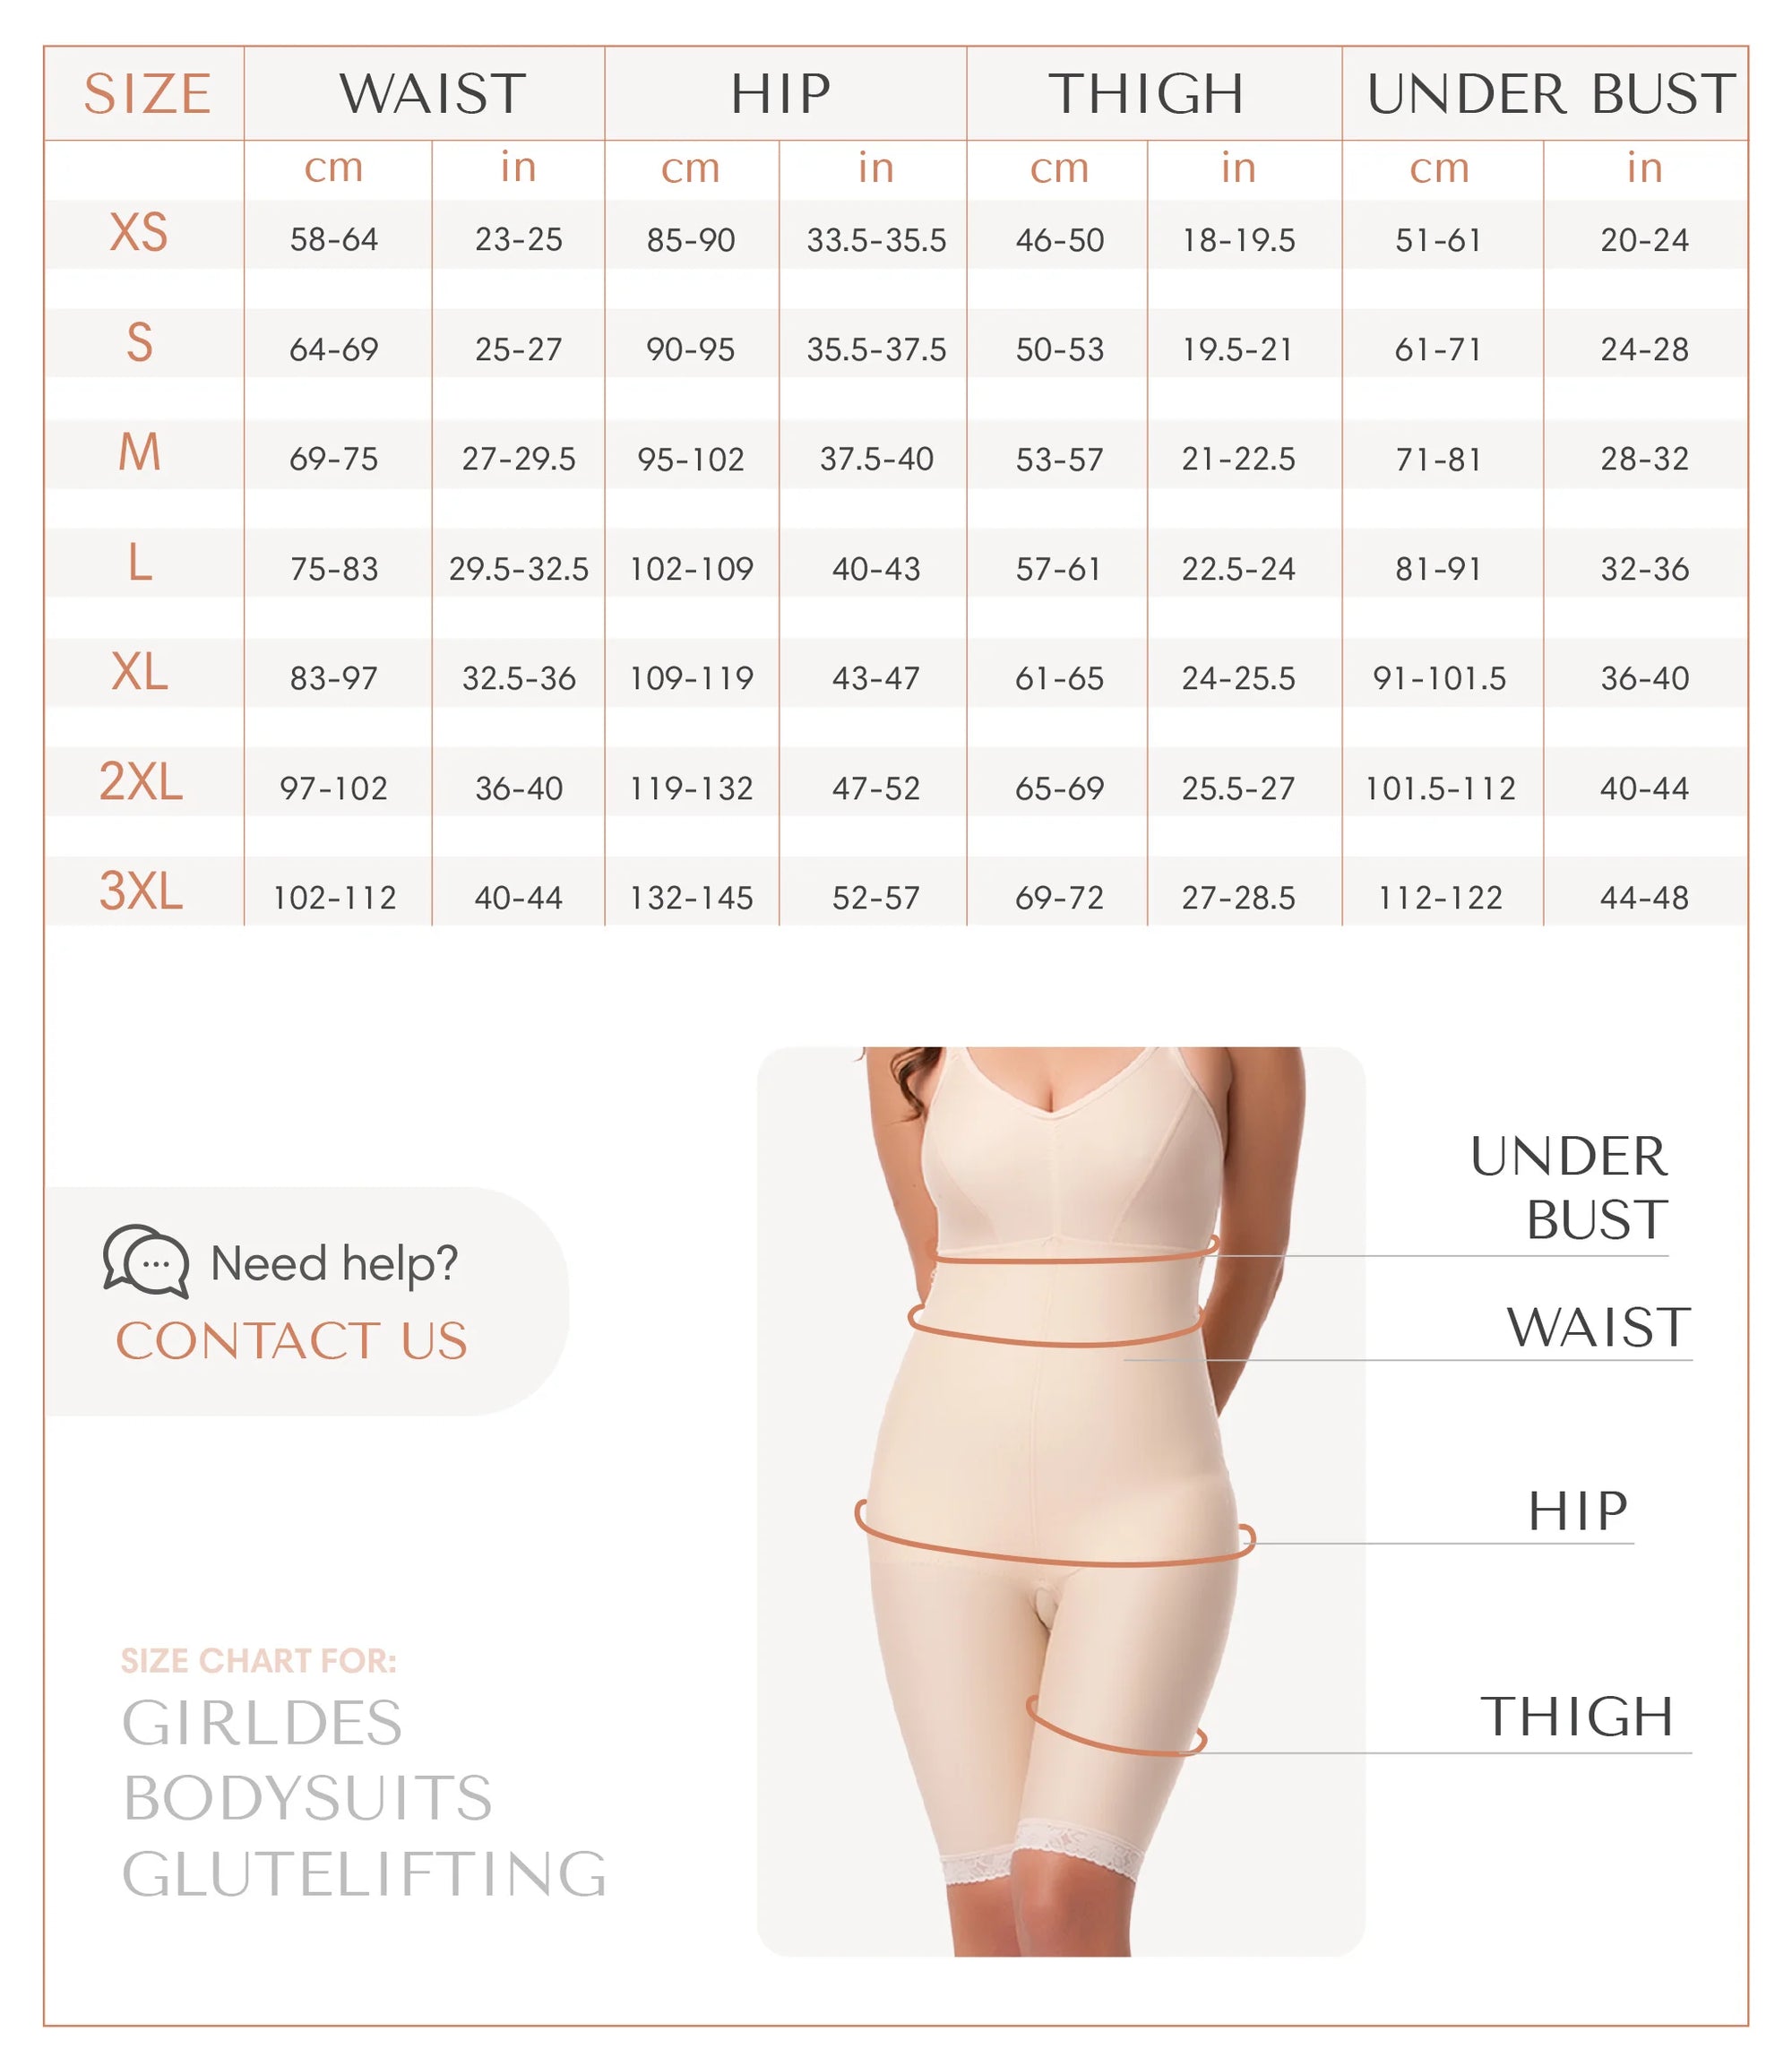 2nd Stage Low Waist Below the Knee Compression Girdle (GR14)